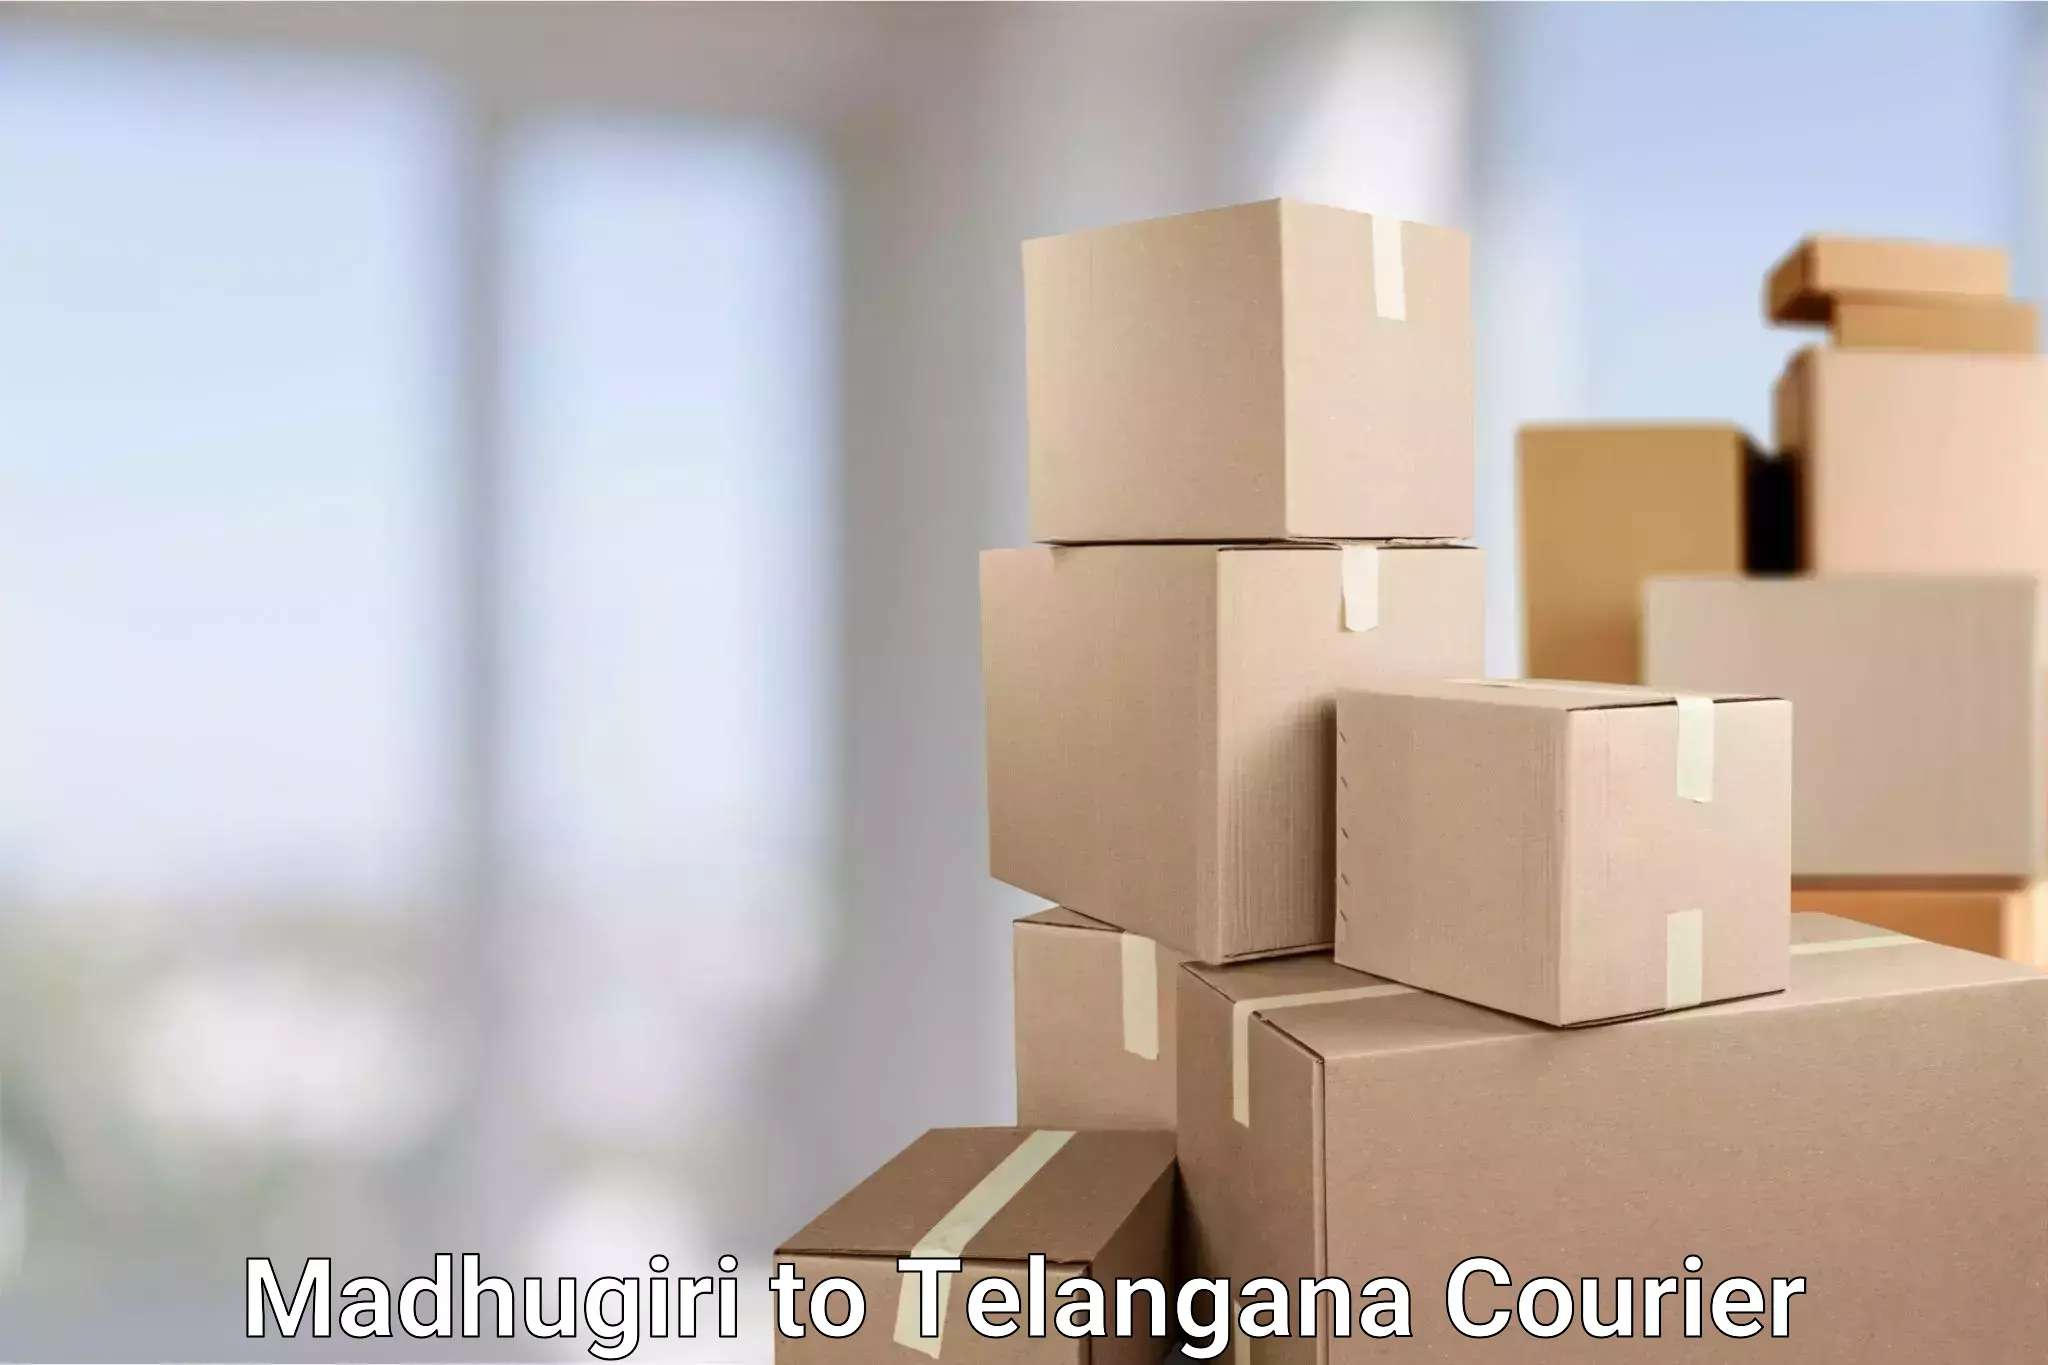 Reliable delivery network Madhugiri to Telangana